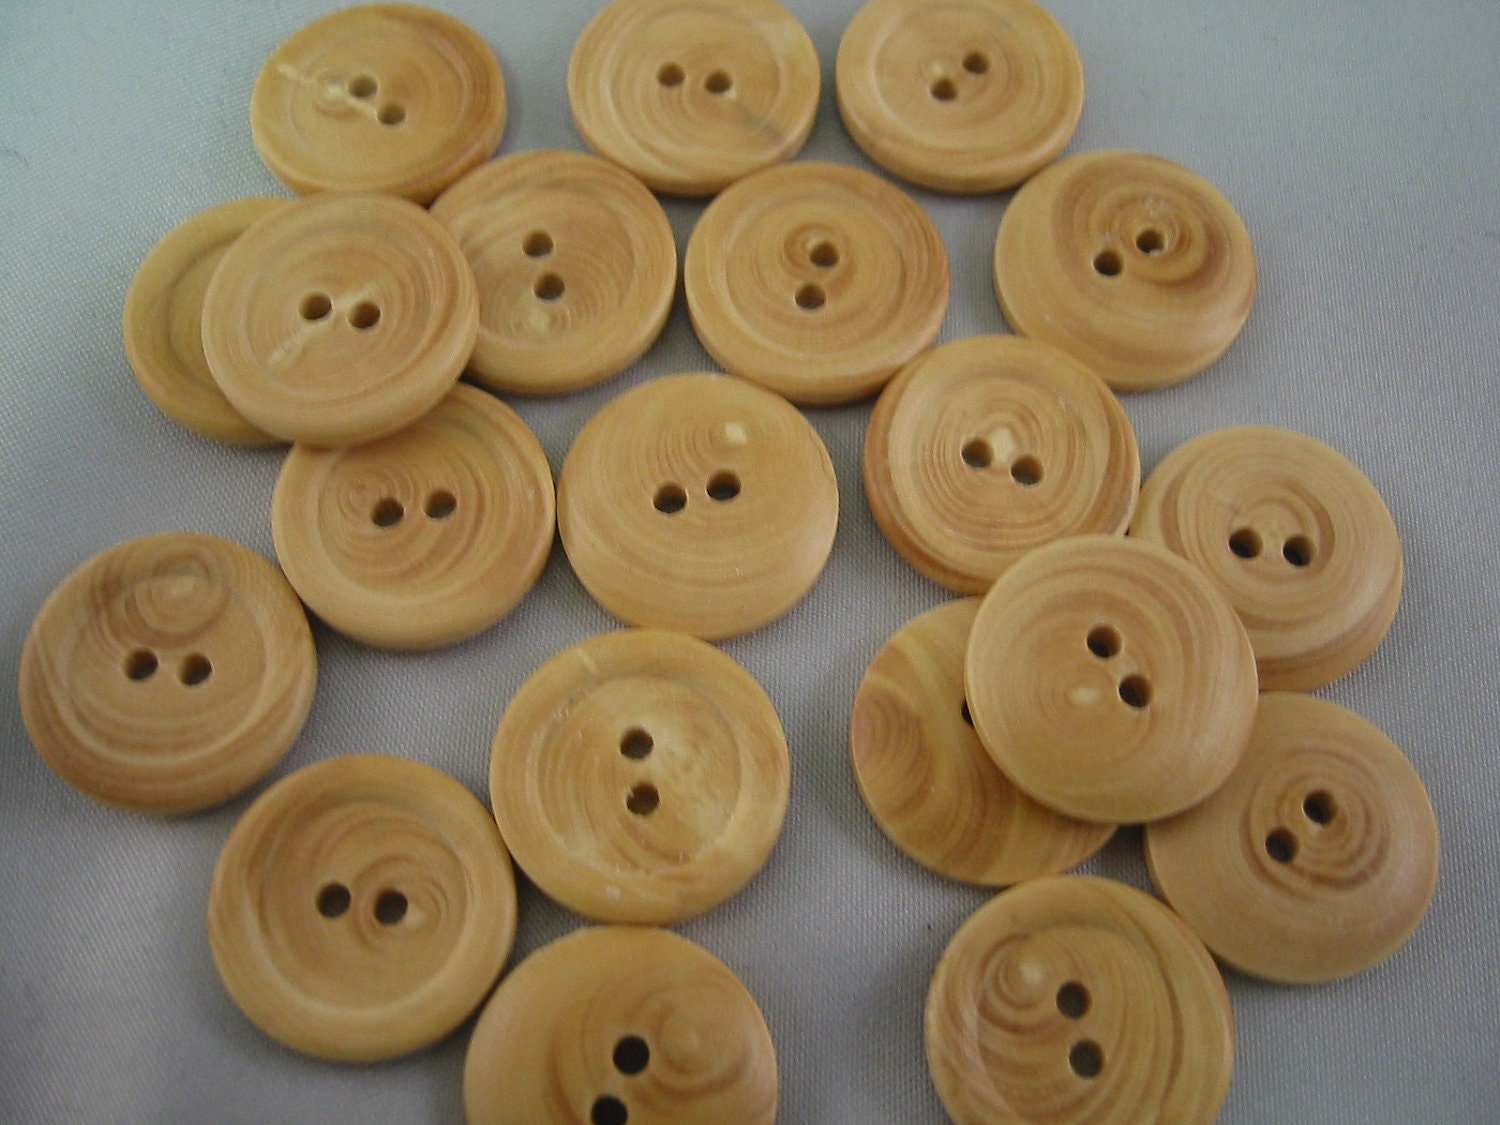 200pcs 30mm Multi Colors Round Big plastic Buttons 4 holes wholesale free  shipping large buttons edged